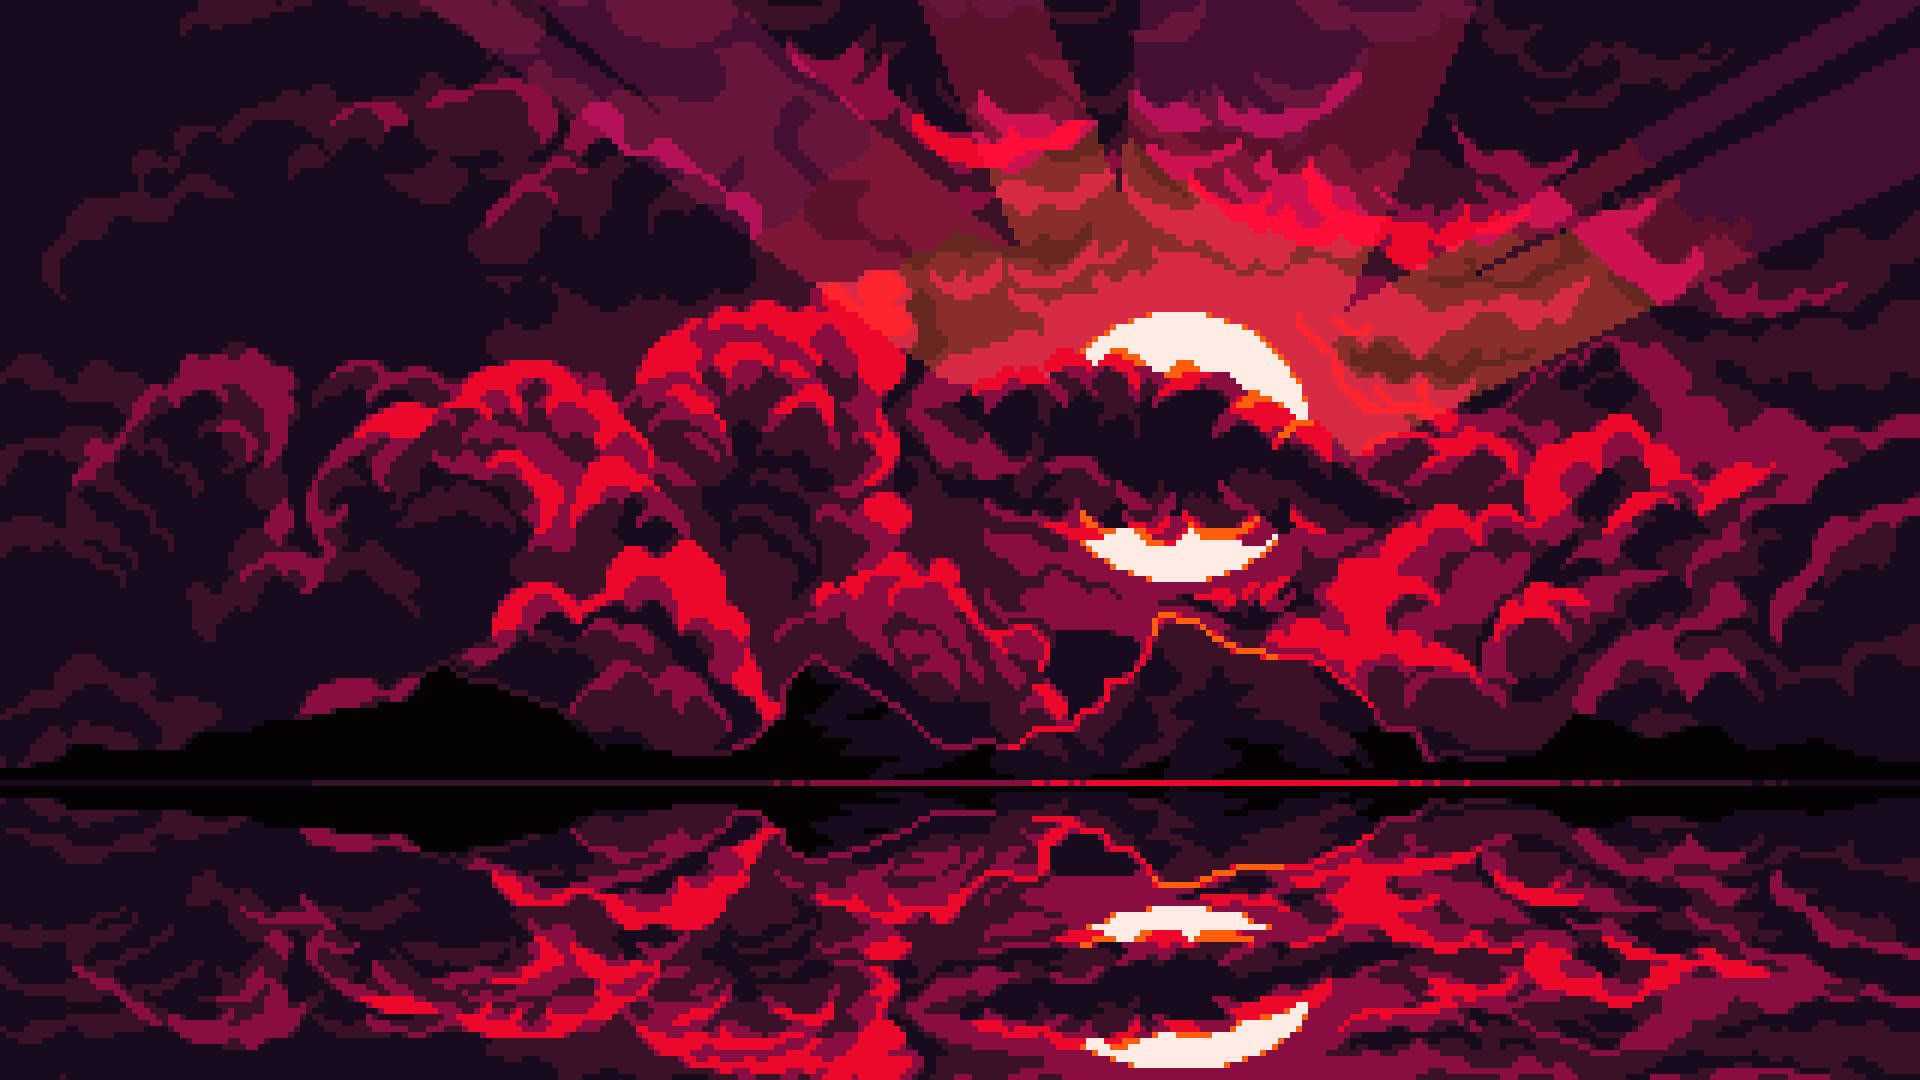 A pixel art sunset with a red sky and a half moon - 1920x1080, sunset